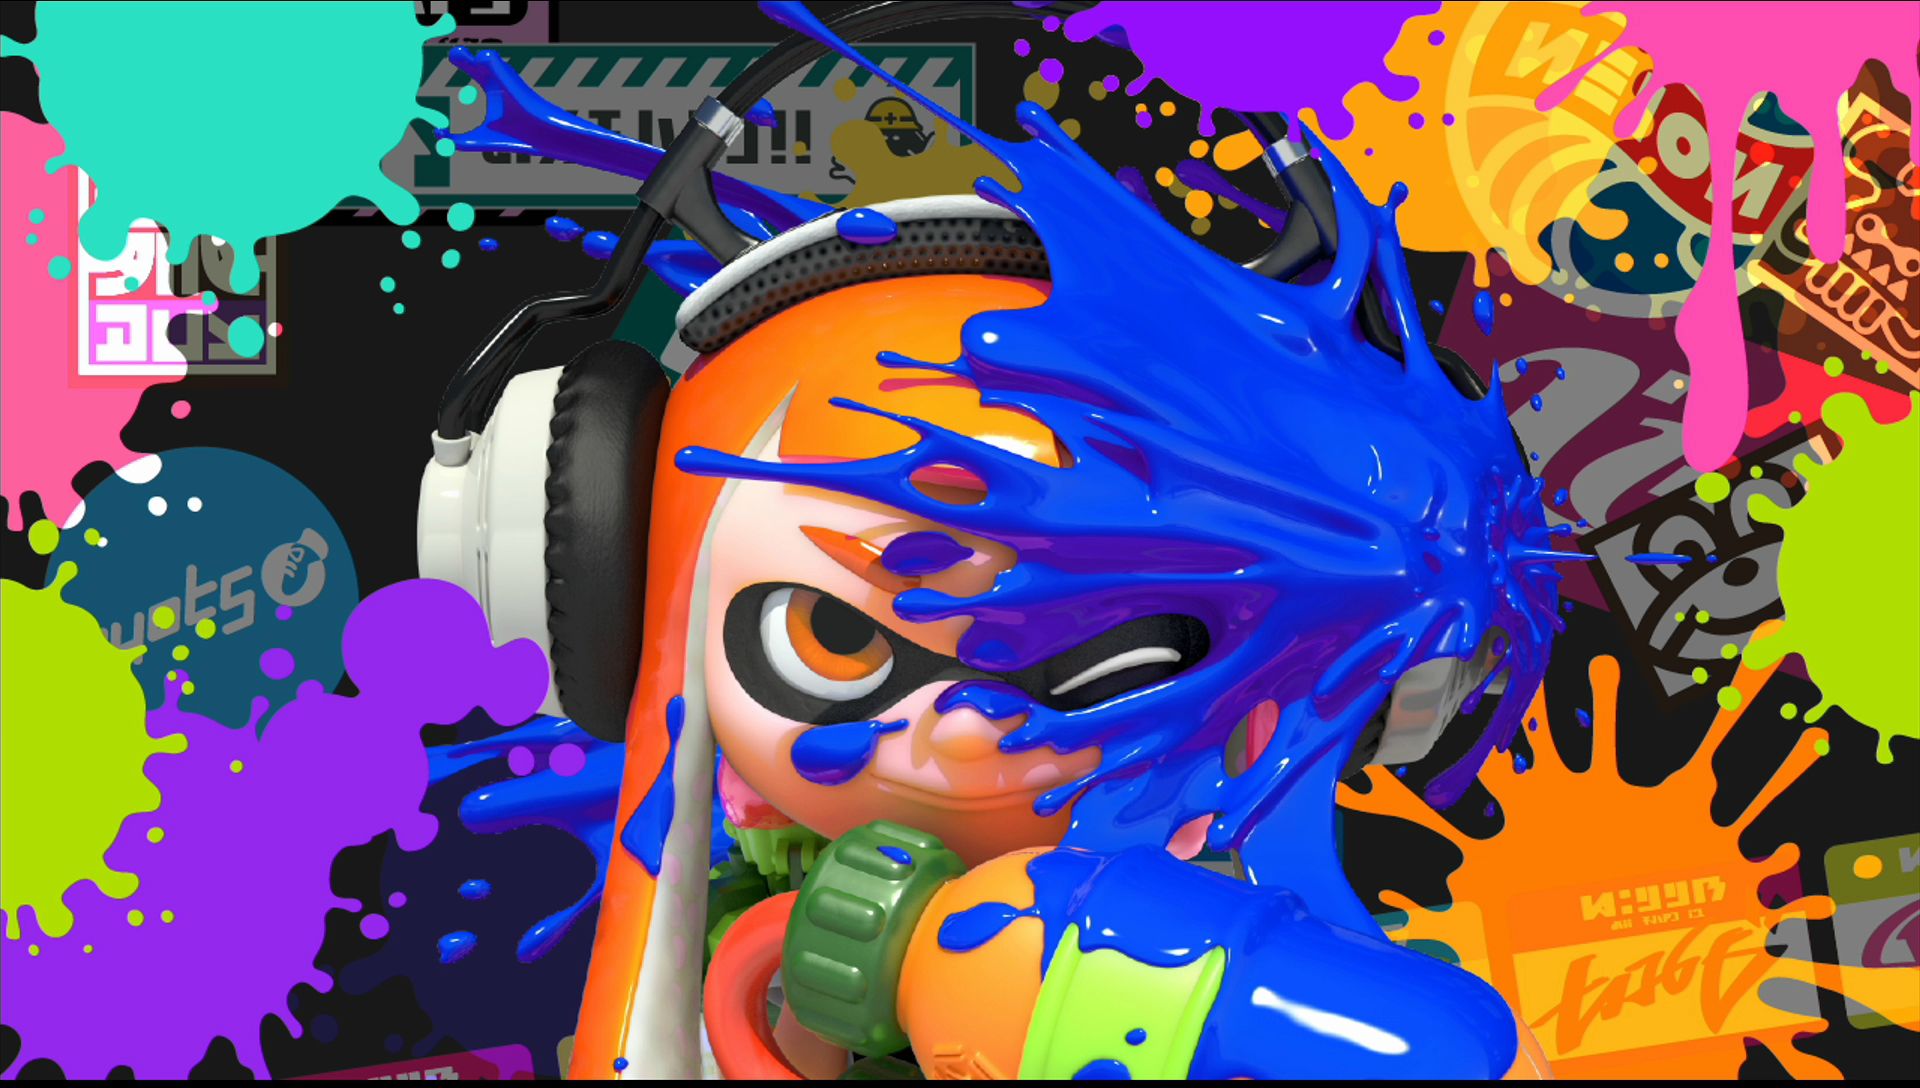 Image for Lorry transporting Special Edition of Splatoon to GAME UK has been stolen